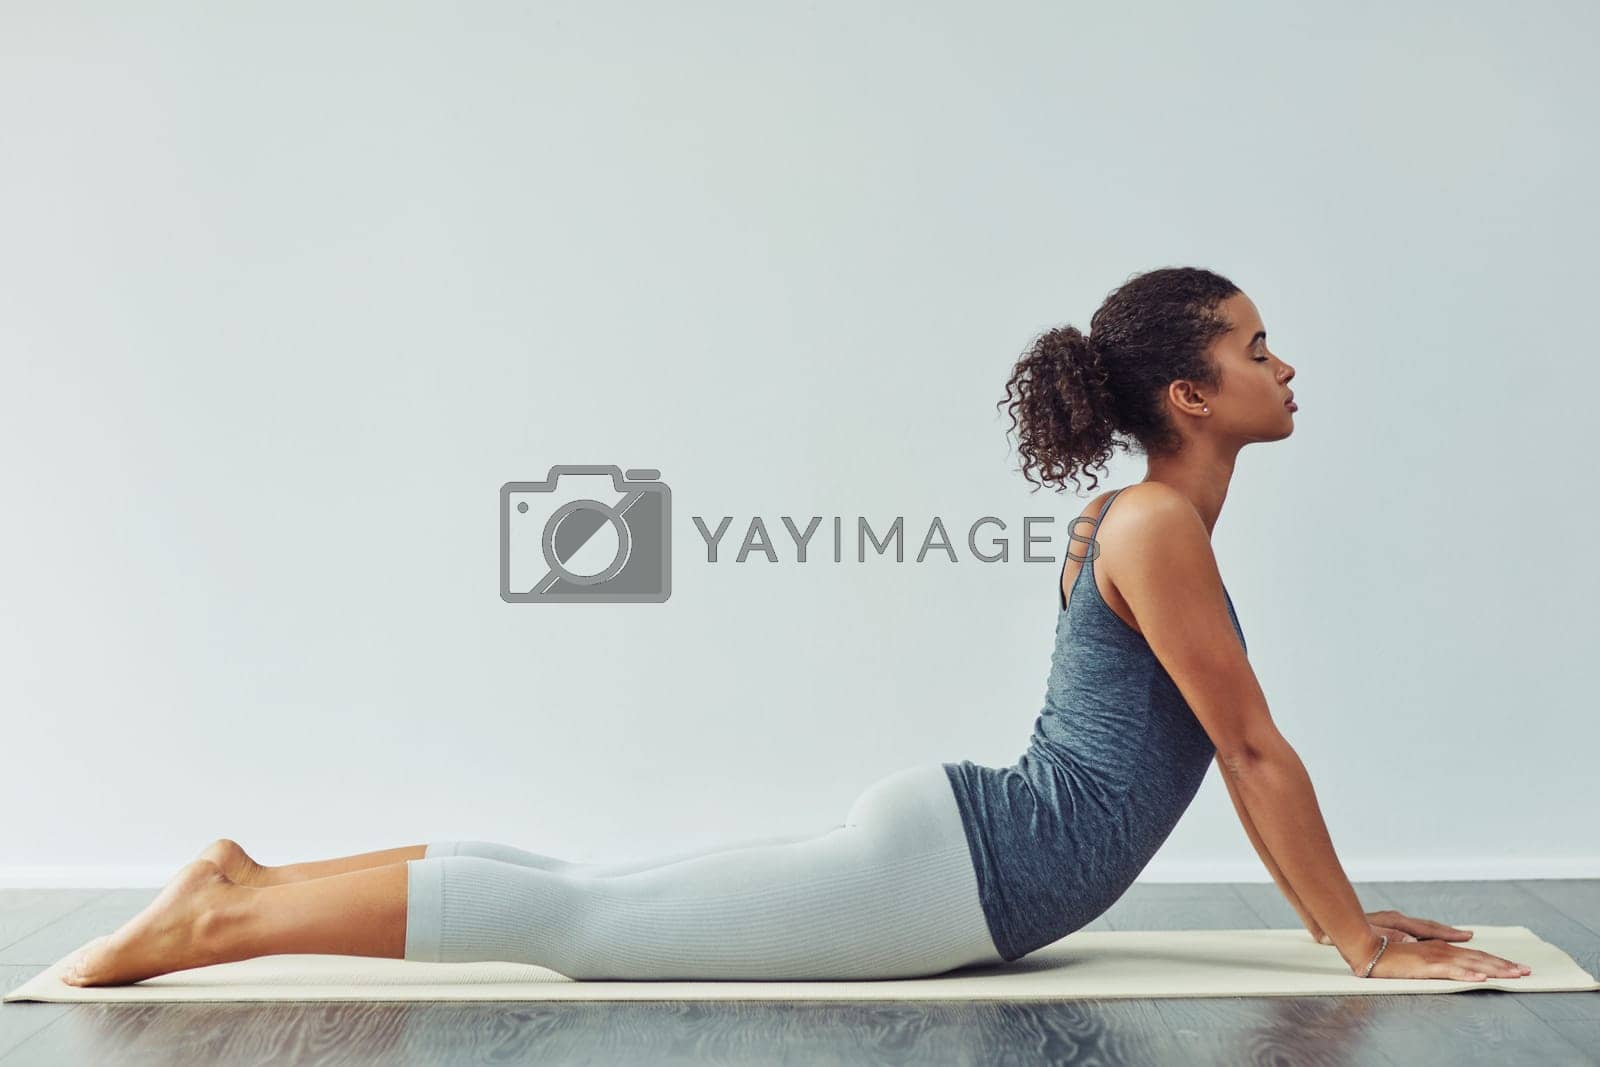 Royalty free image of Yoga is a great way to stretch your body. Studio shot of an attractive young woman practicing yoga against a grey background. by YuriArcurs